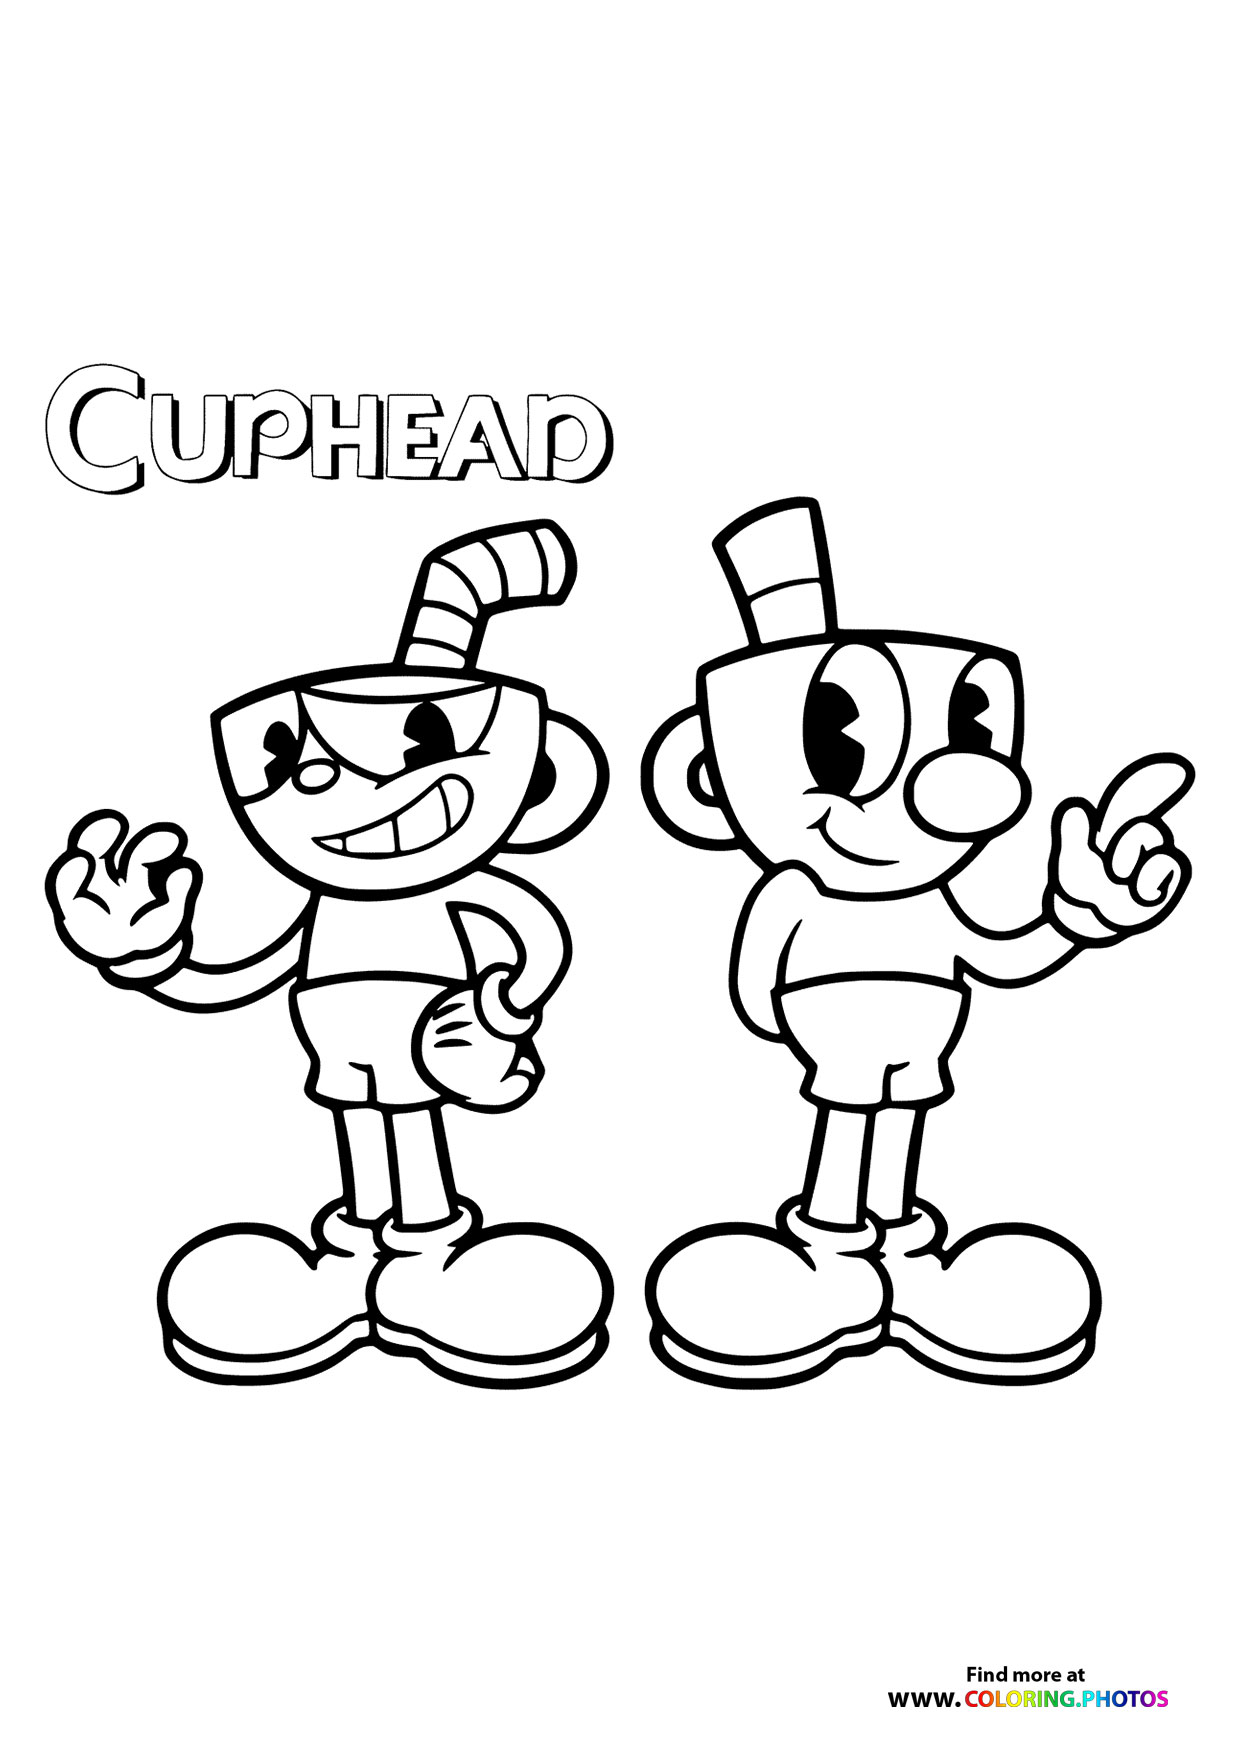 CupHead MugMan Coloring Pages